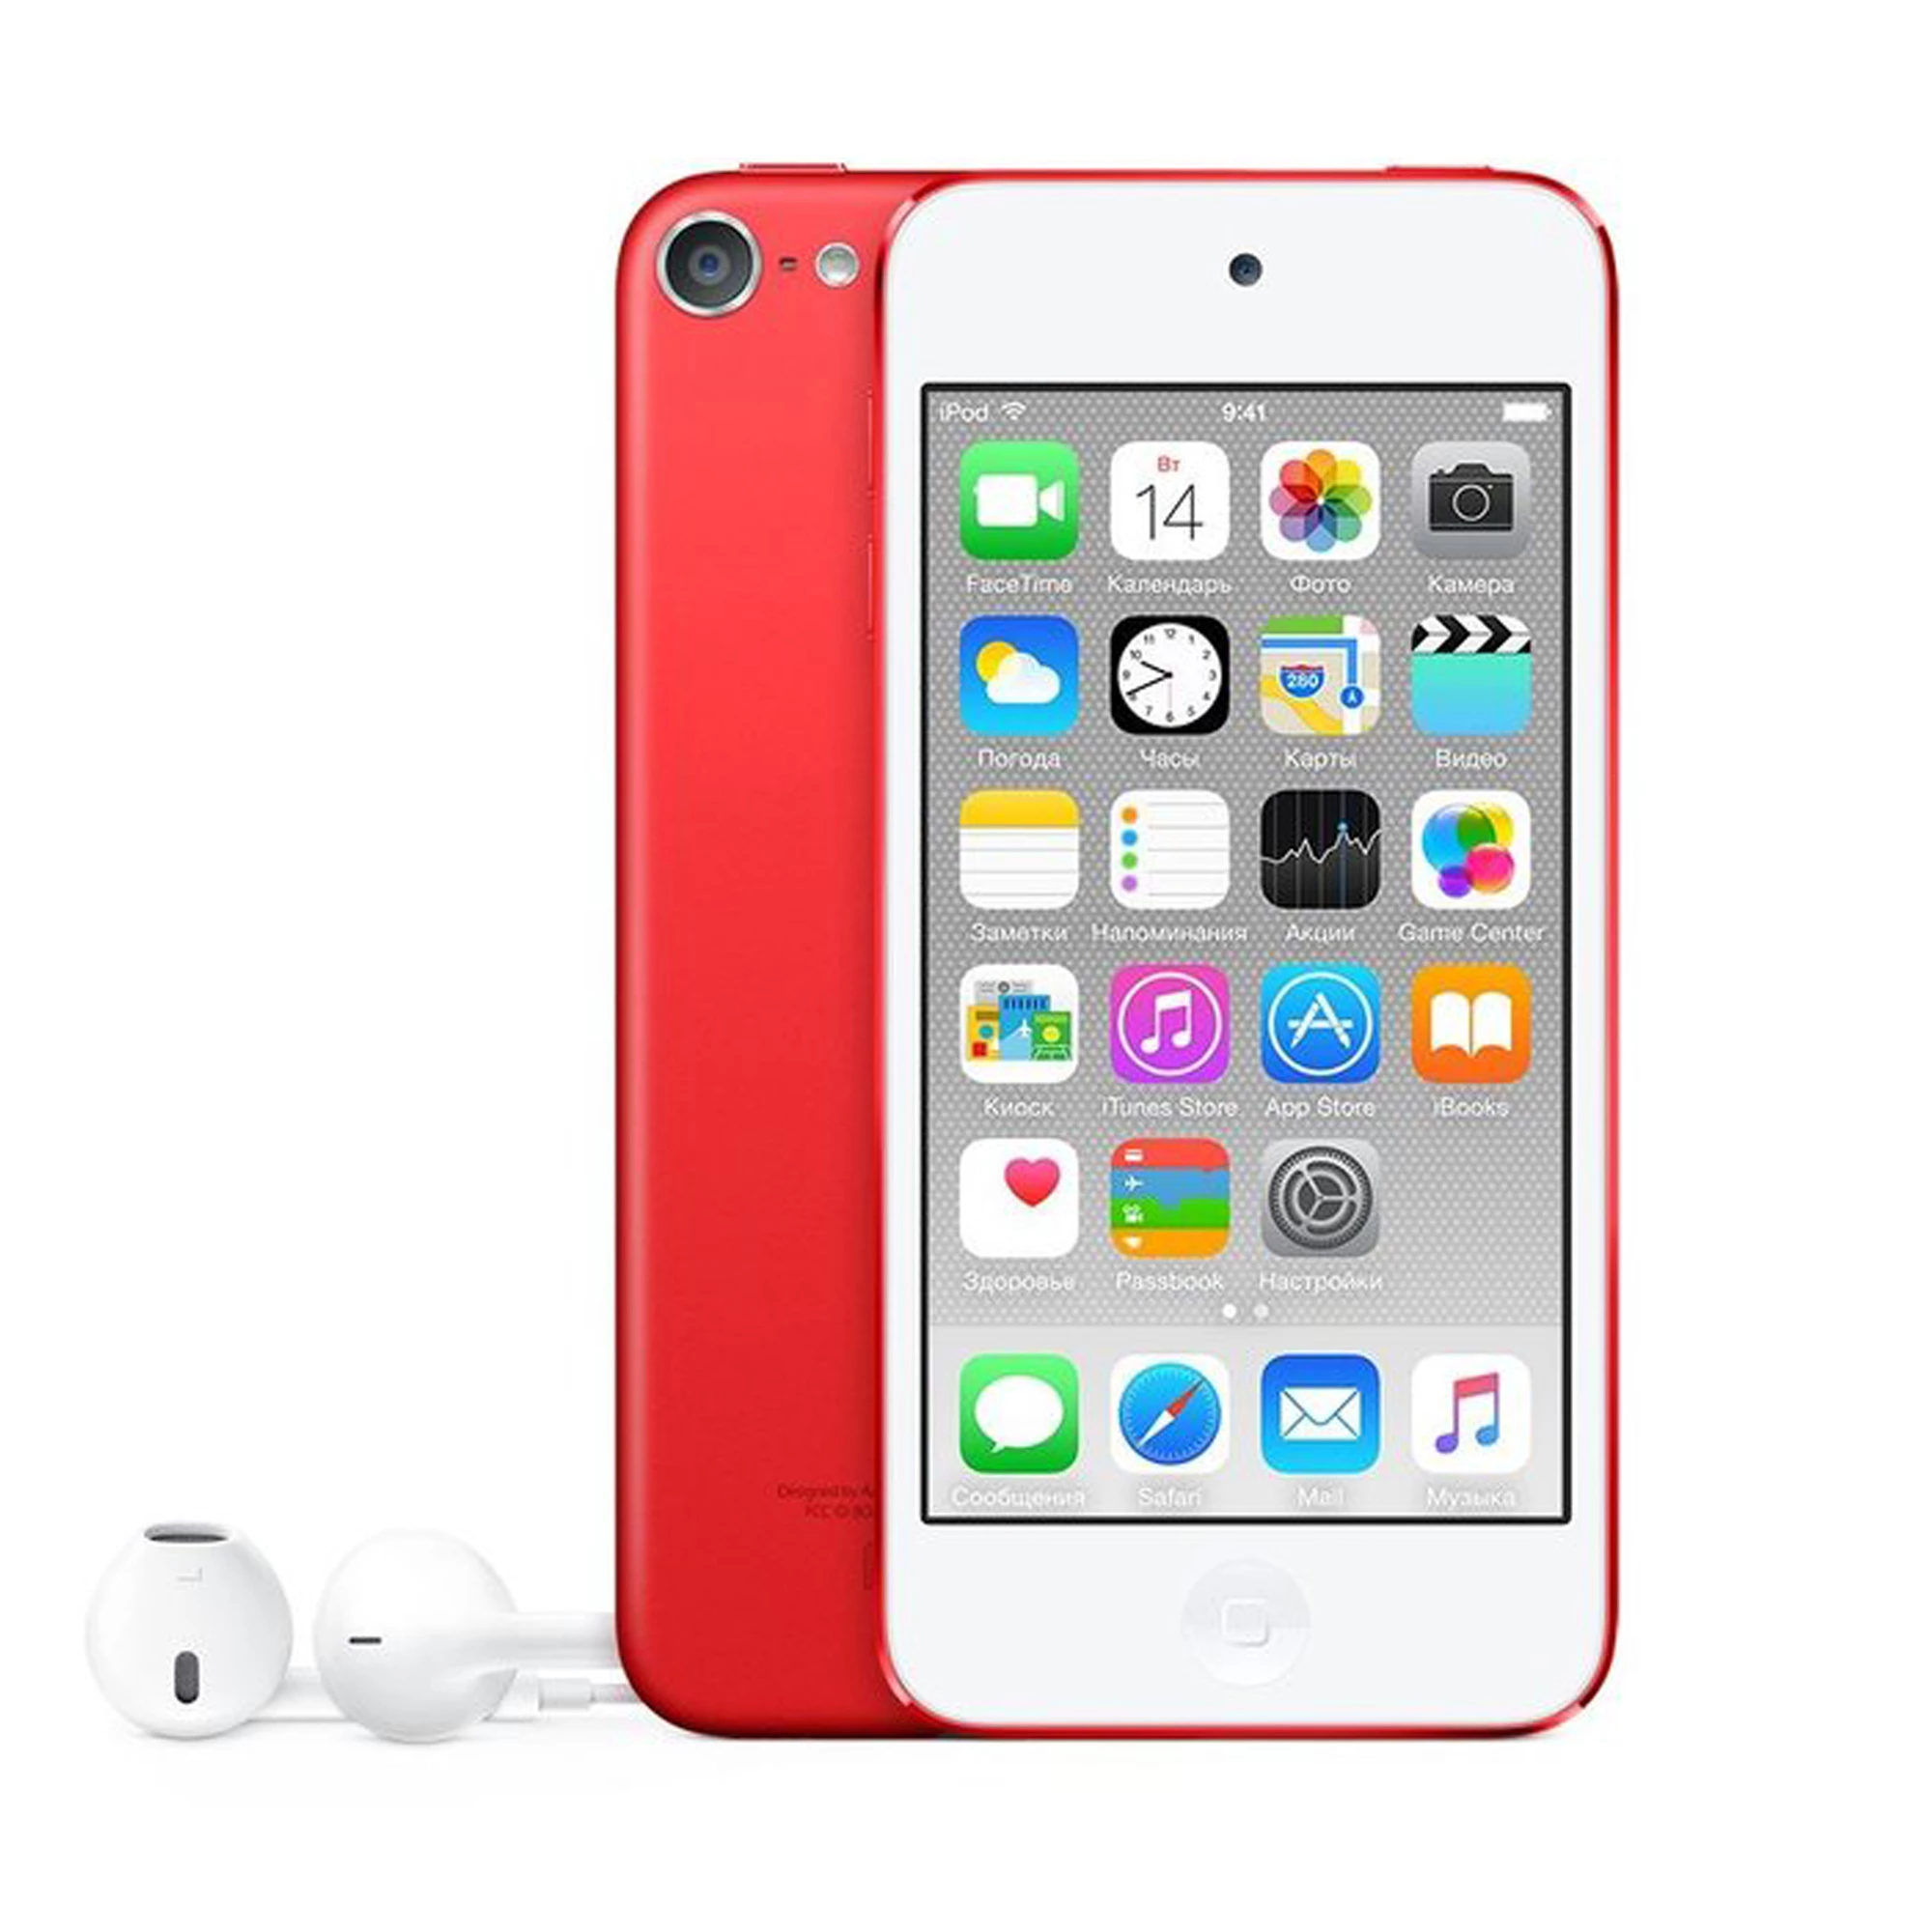 iPod touch 6Gen 16GB Red (MKH82)